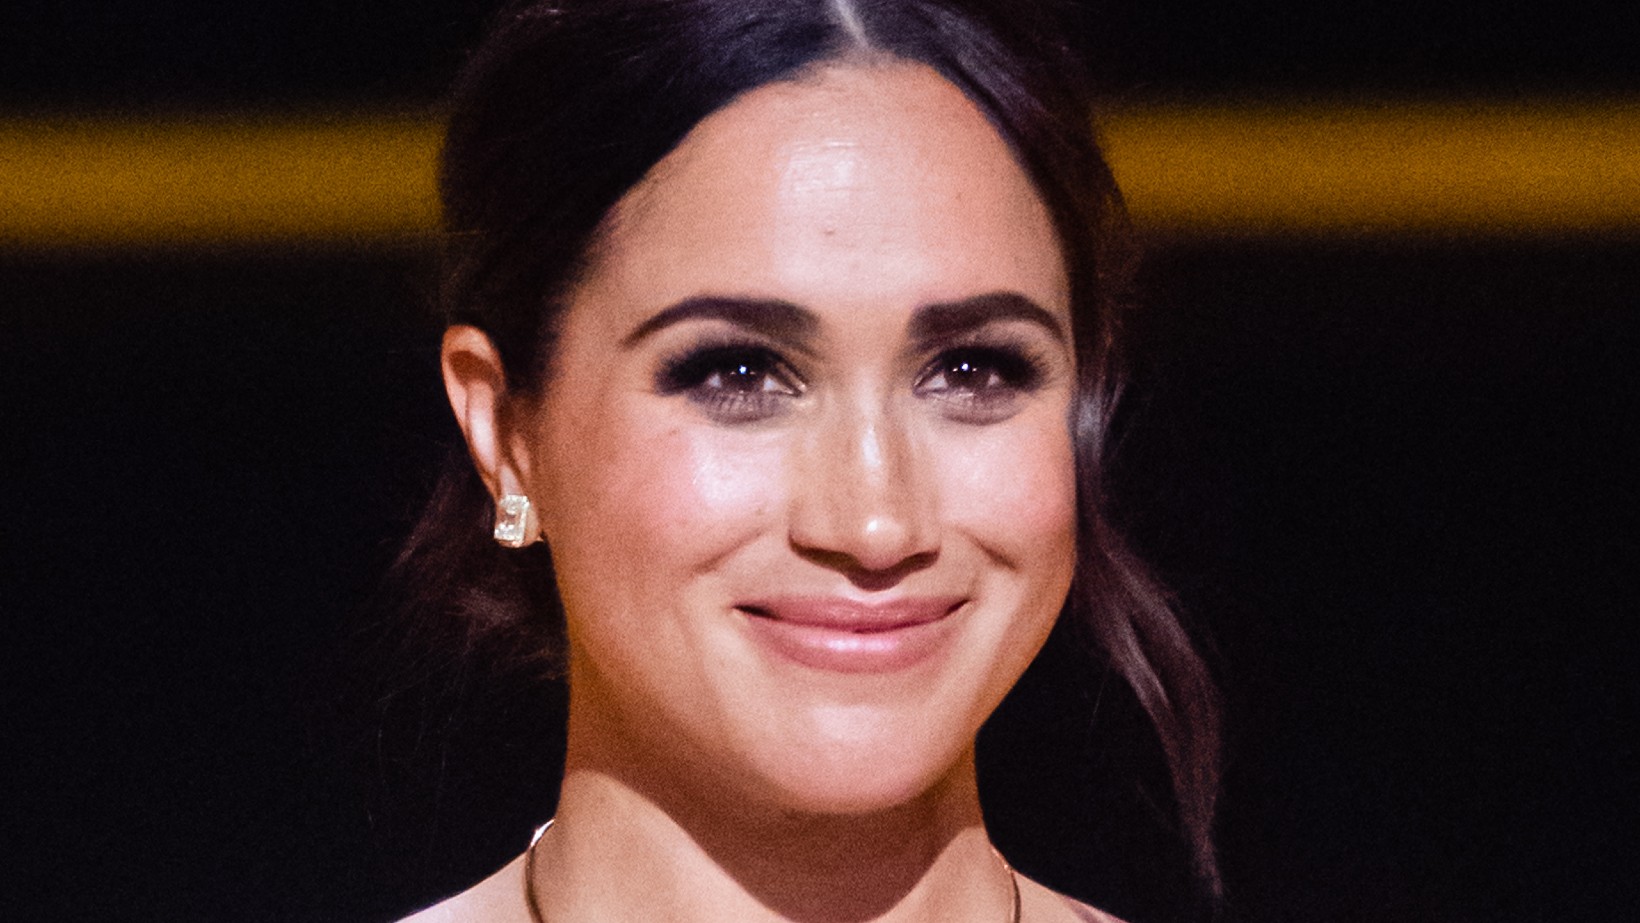 Meghan Markle Hires Adele and Jennifer Lawrence's Stylist as Her